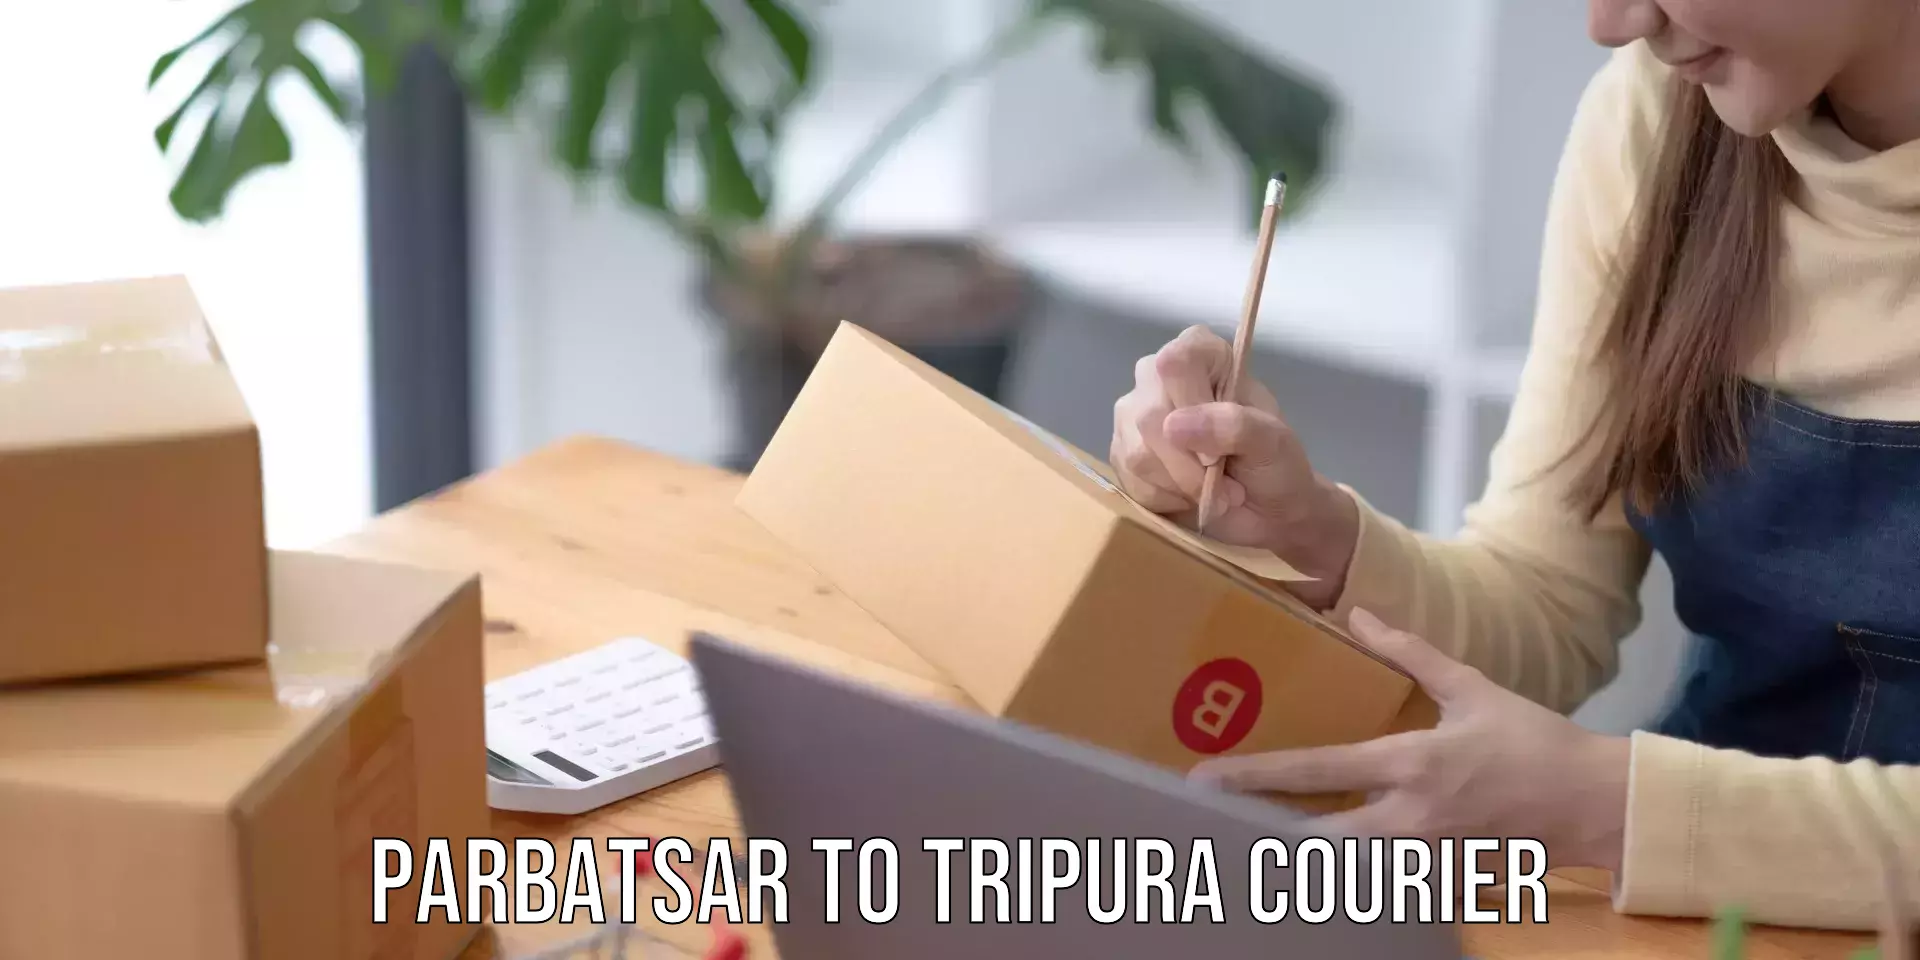 Nationwide delivery network Parbatsar to Tripura